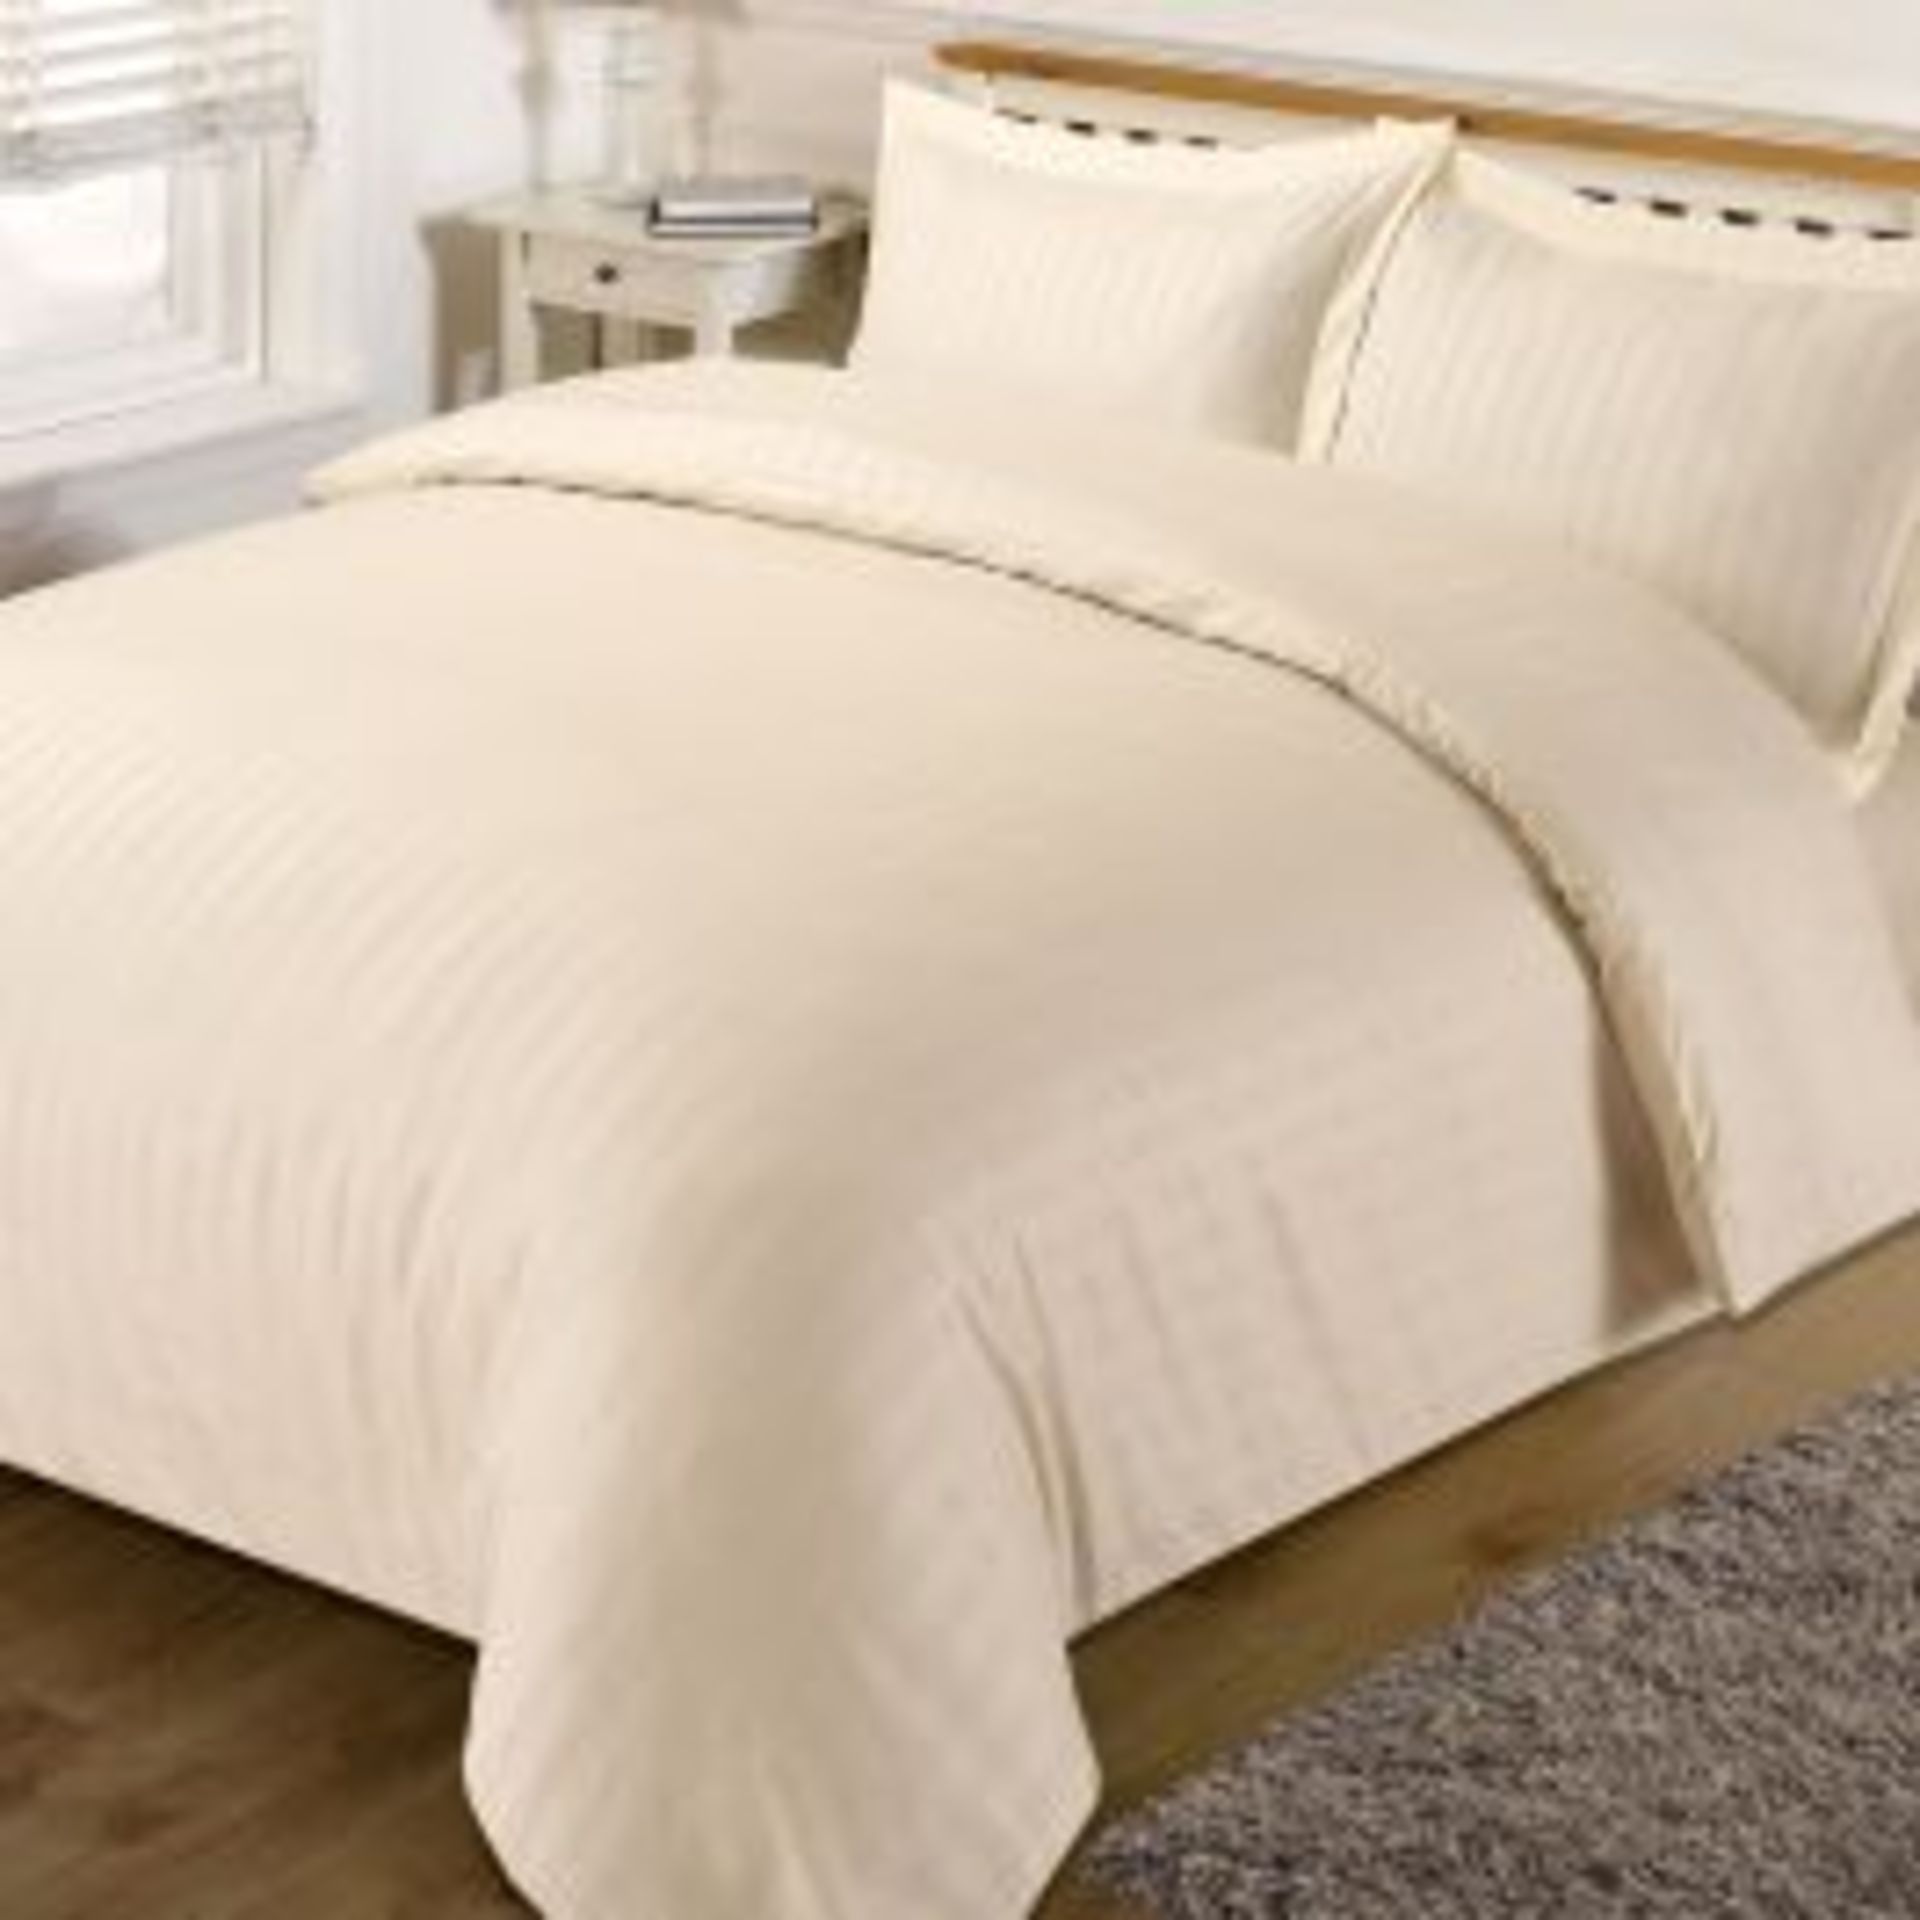 SATIN CREAM SINGLE DUVET SET (IMAGE IS FOR ILLUSTRATIVE OURPOSE ONLY ITEM IS A SINGLE PLAIN SET) RRP